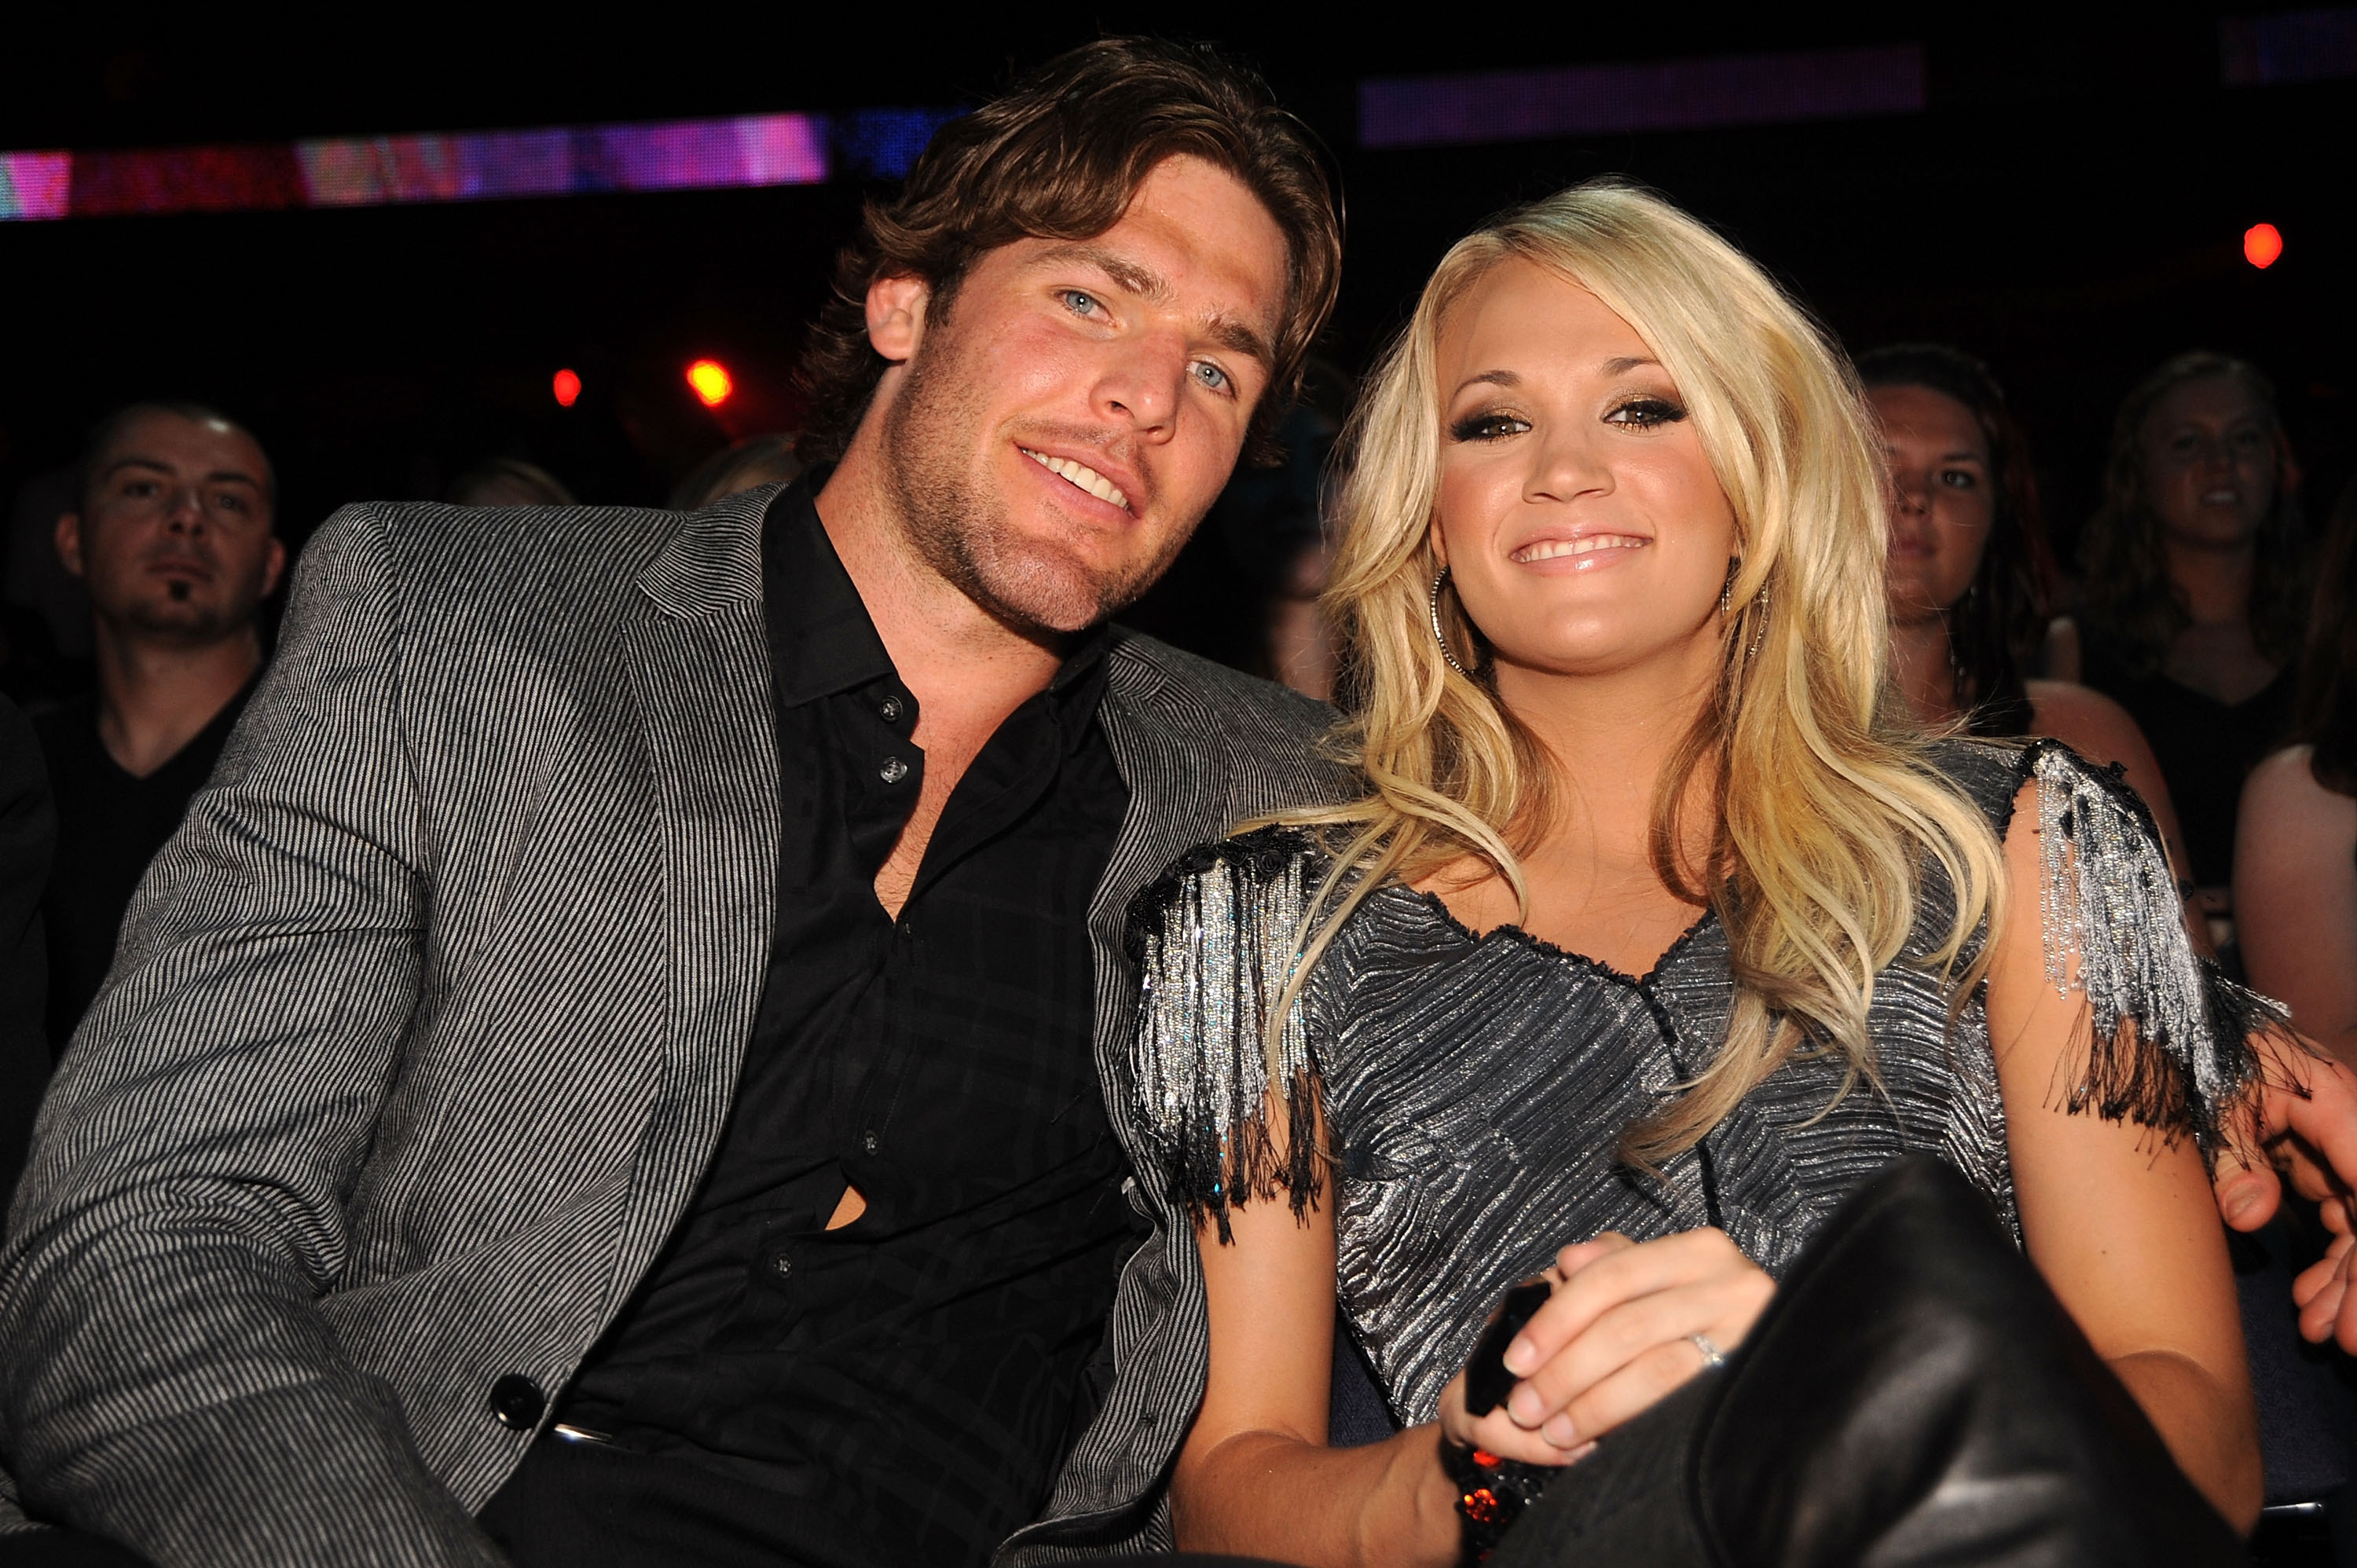 7. Carrie Underwood confirmed that she was. to Mike Fisher. engaged. 